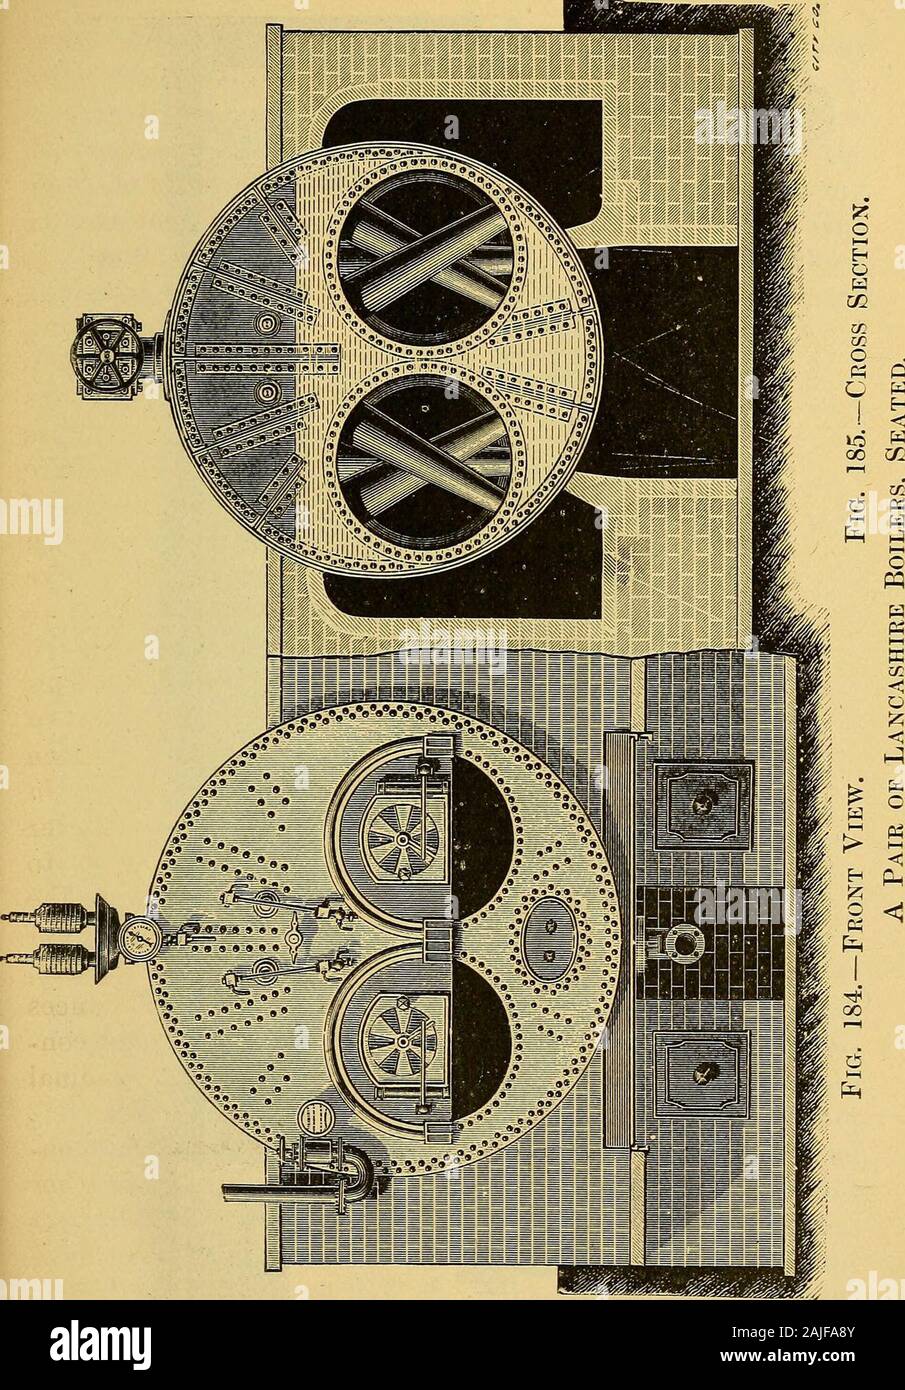 Cotton weaving: its development, principles, and practice . ther increase  the steam generative power, the fluesare fitted with what are termed  Galloway tubes, shownin the cross section (fig. 185). These have long